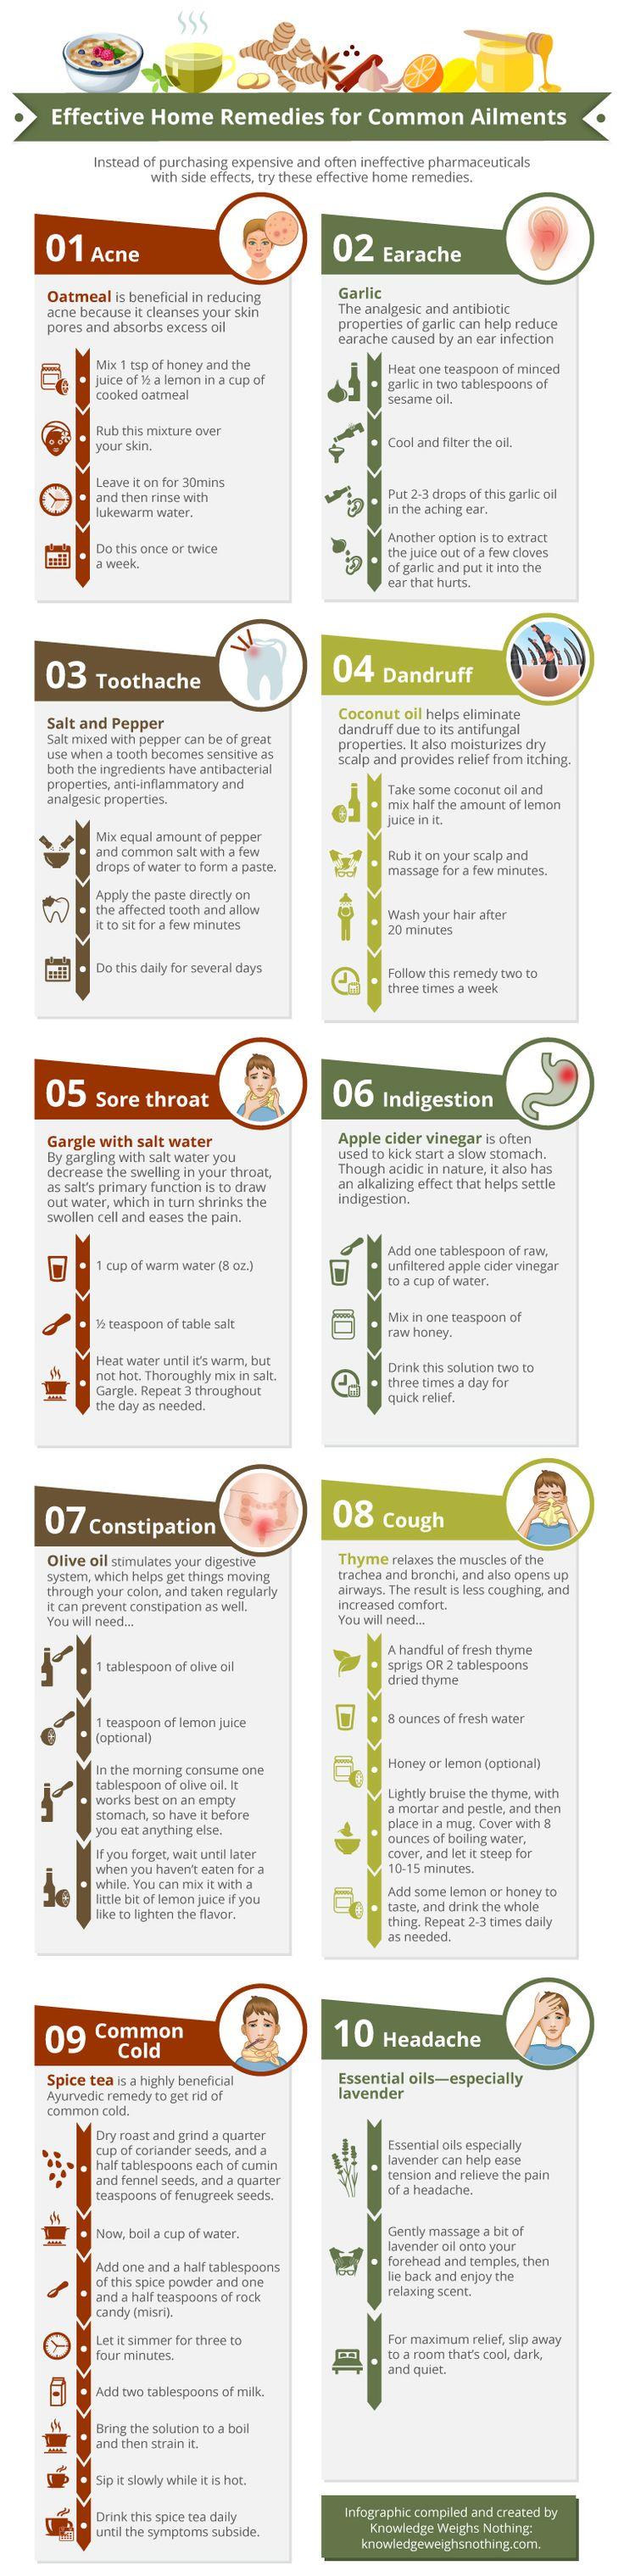 Wedding - Home Remedy Infographic For Common Ailments